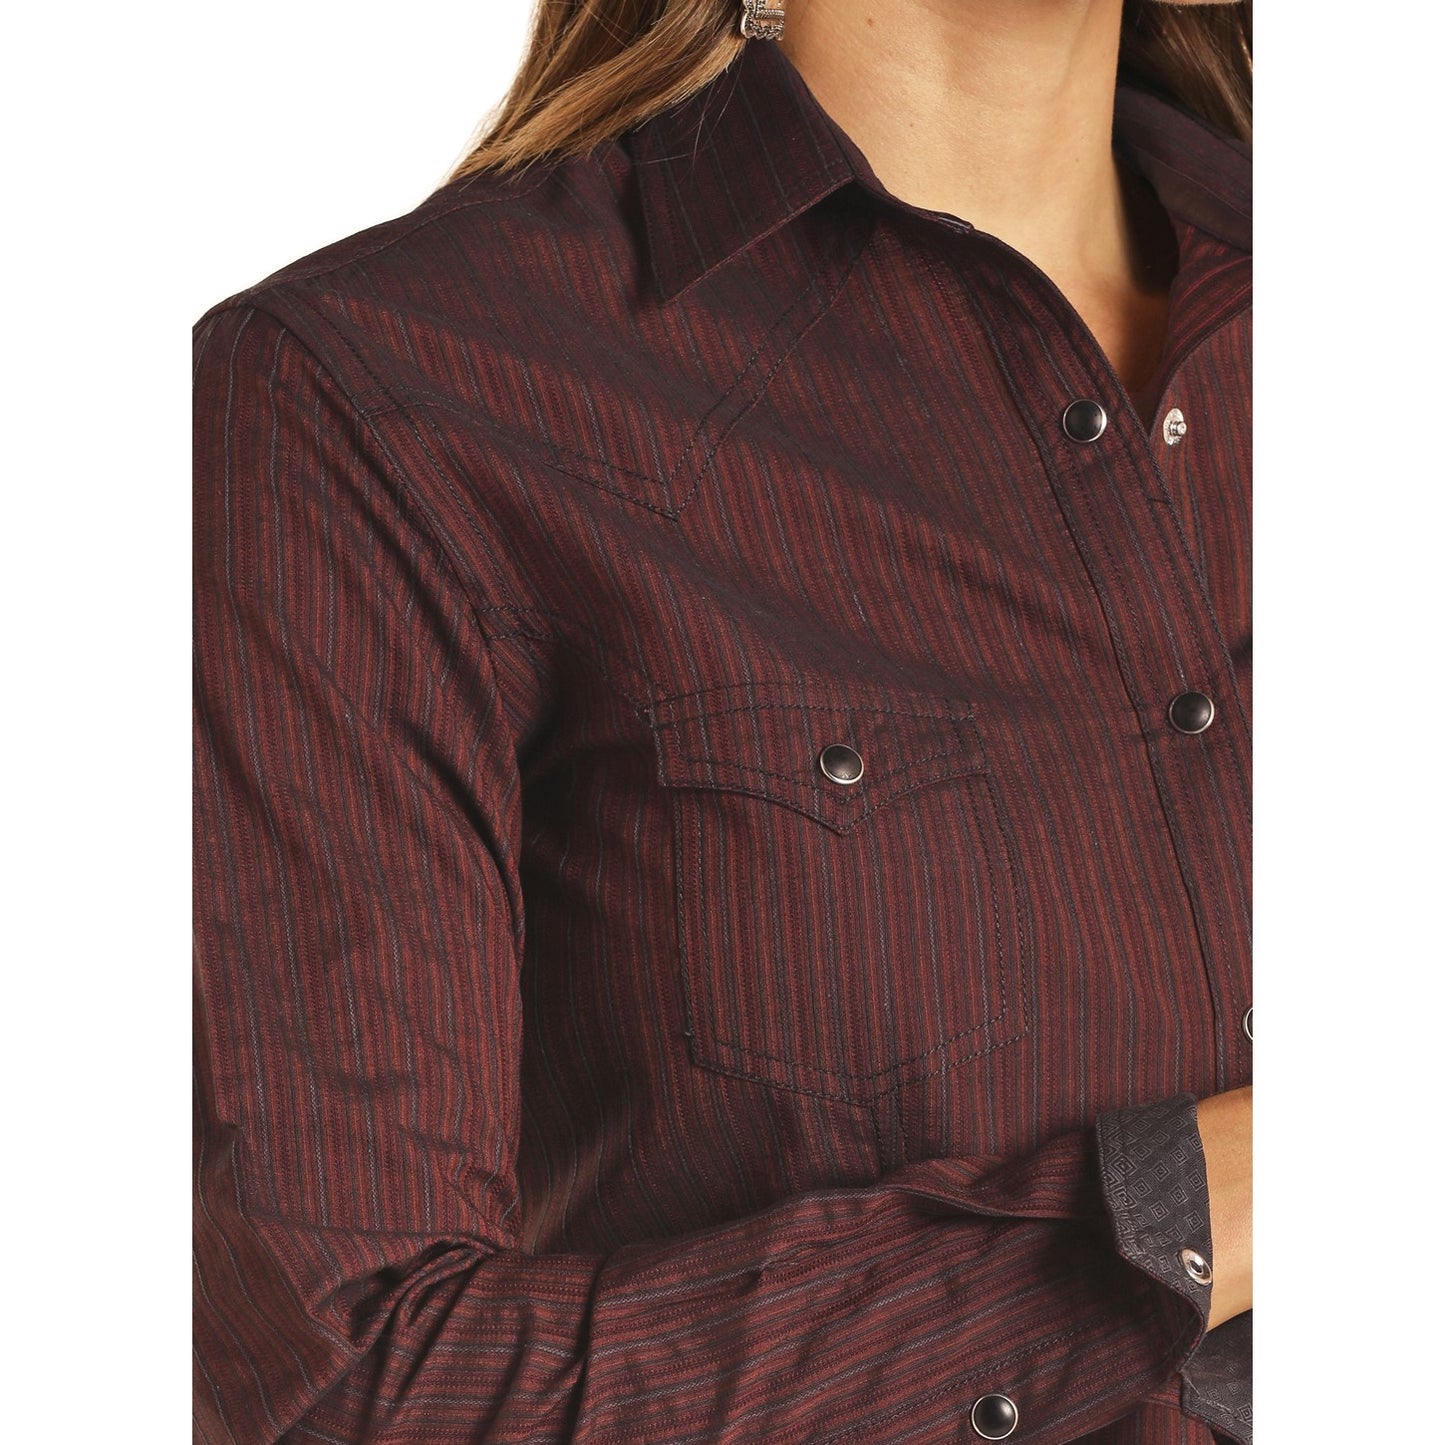 Panhandle Rough Stock Ladies Maroon Textured Dobby Snap Shirt R4S2507